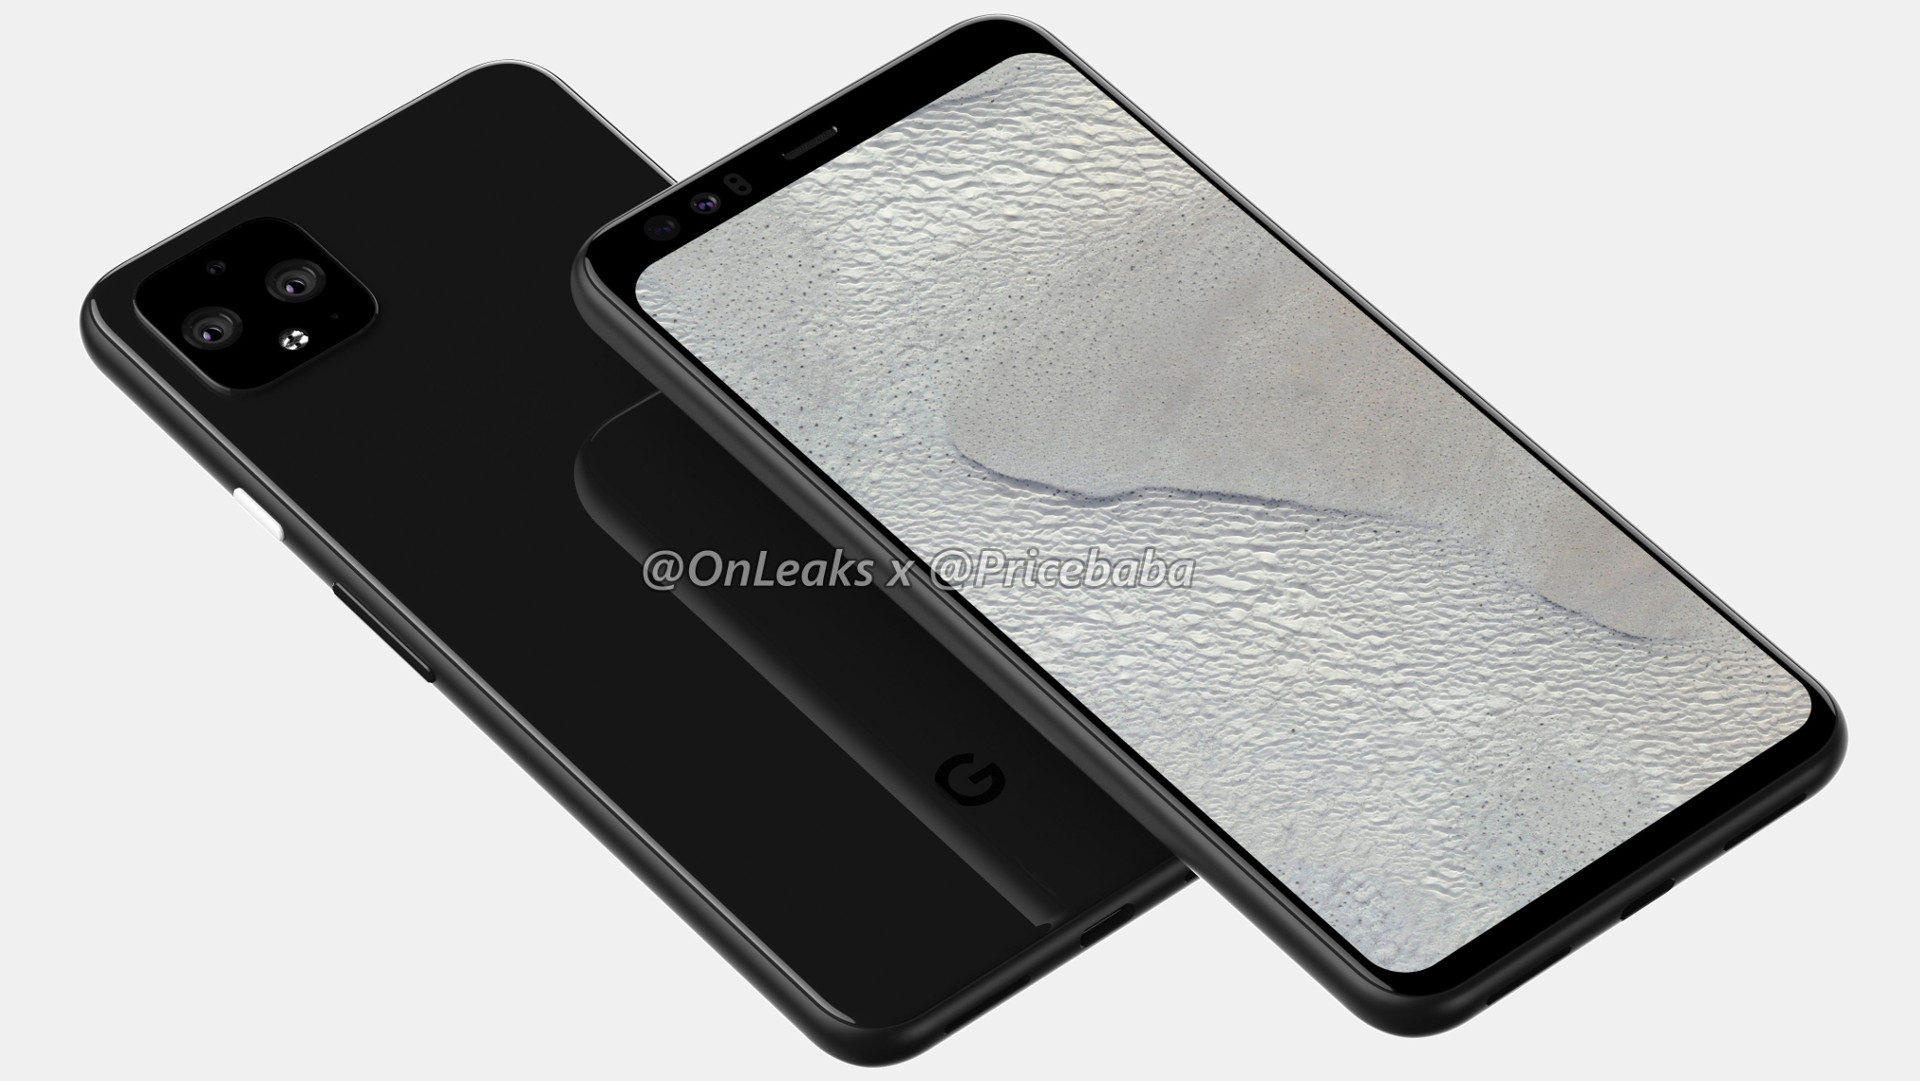 The Google Pixel 4 XL front and back design